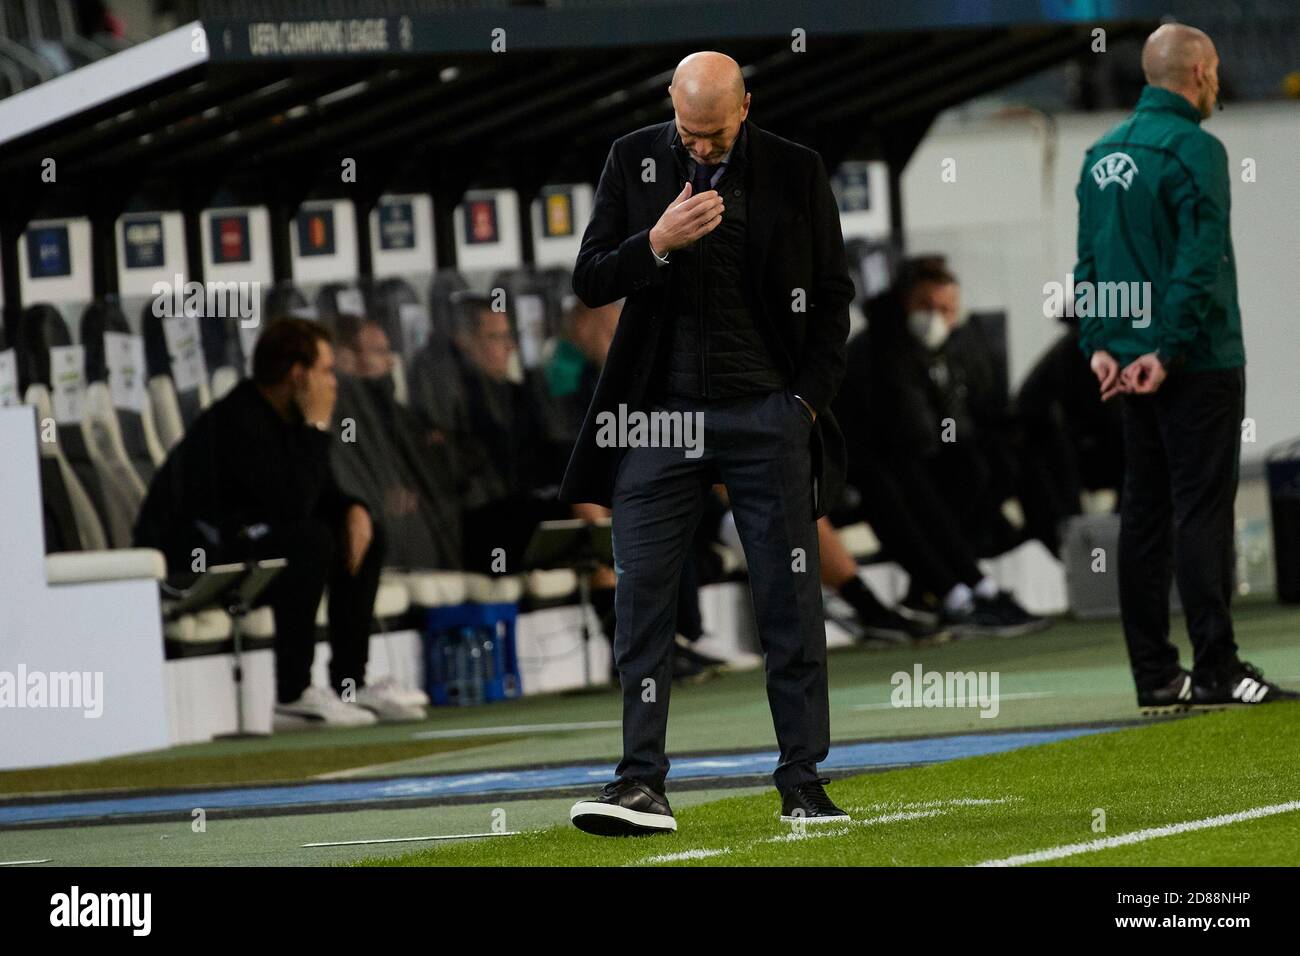 Monchengladbach, Germany. 27th Oct, 2020. Zinedine Zidane of Real Madrid during the UEFA Champions League match between Borussia Monchengladbach and Real Madrid at Borussia-Park on October 27, 2020 in Monchengladbach, Spain. Credit: Dax Images/Alamy Live News Stock Photo